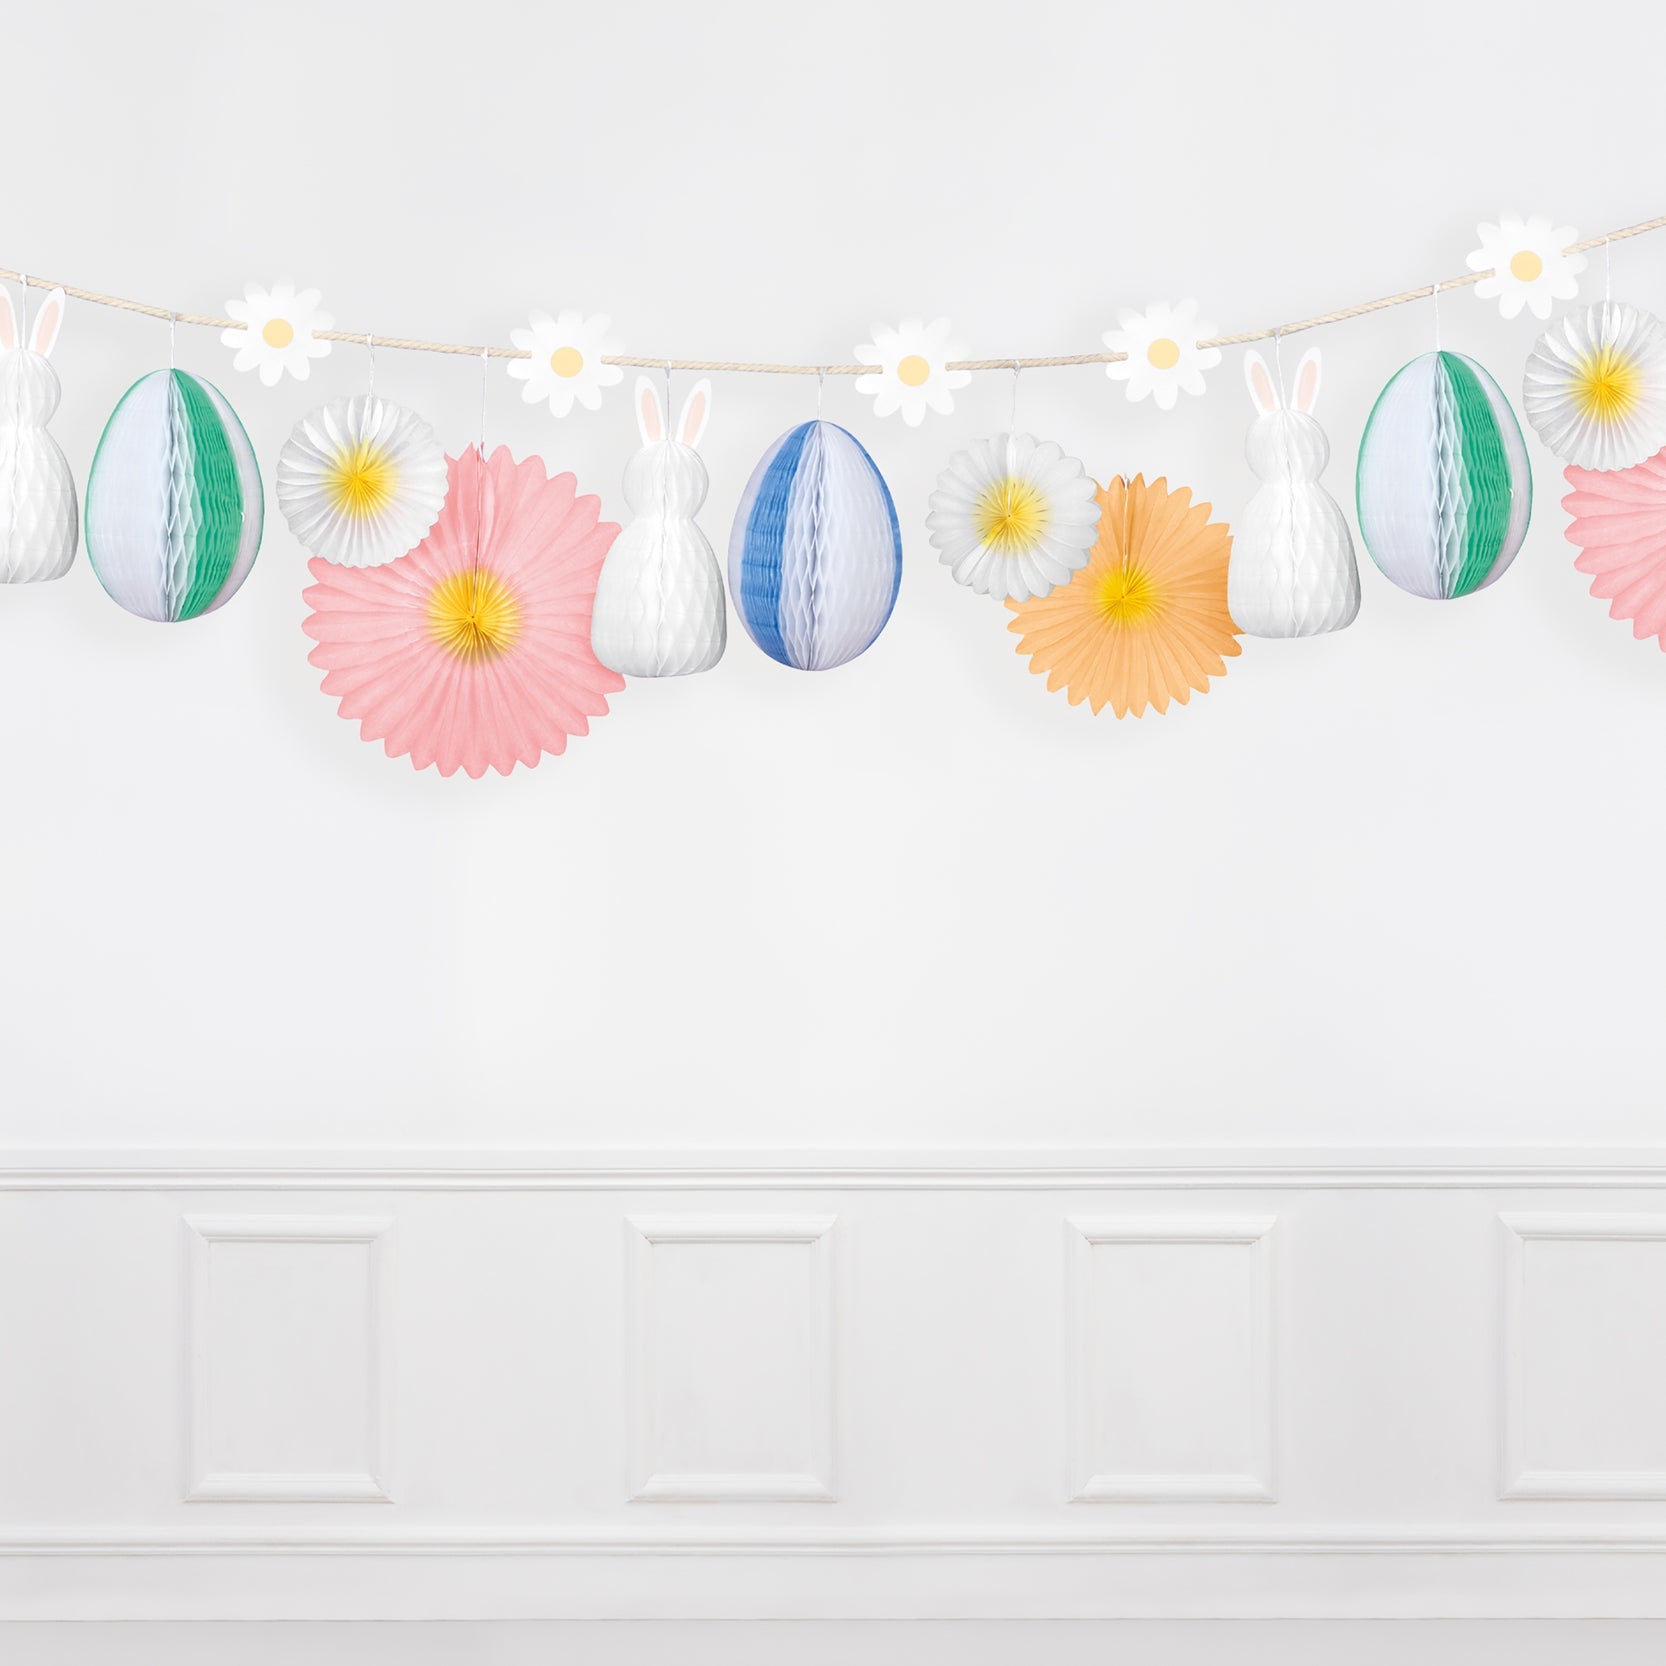 This Honey Easter Bunny Garland by Meri Meri is the perfect addition to your Easter party decorations.